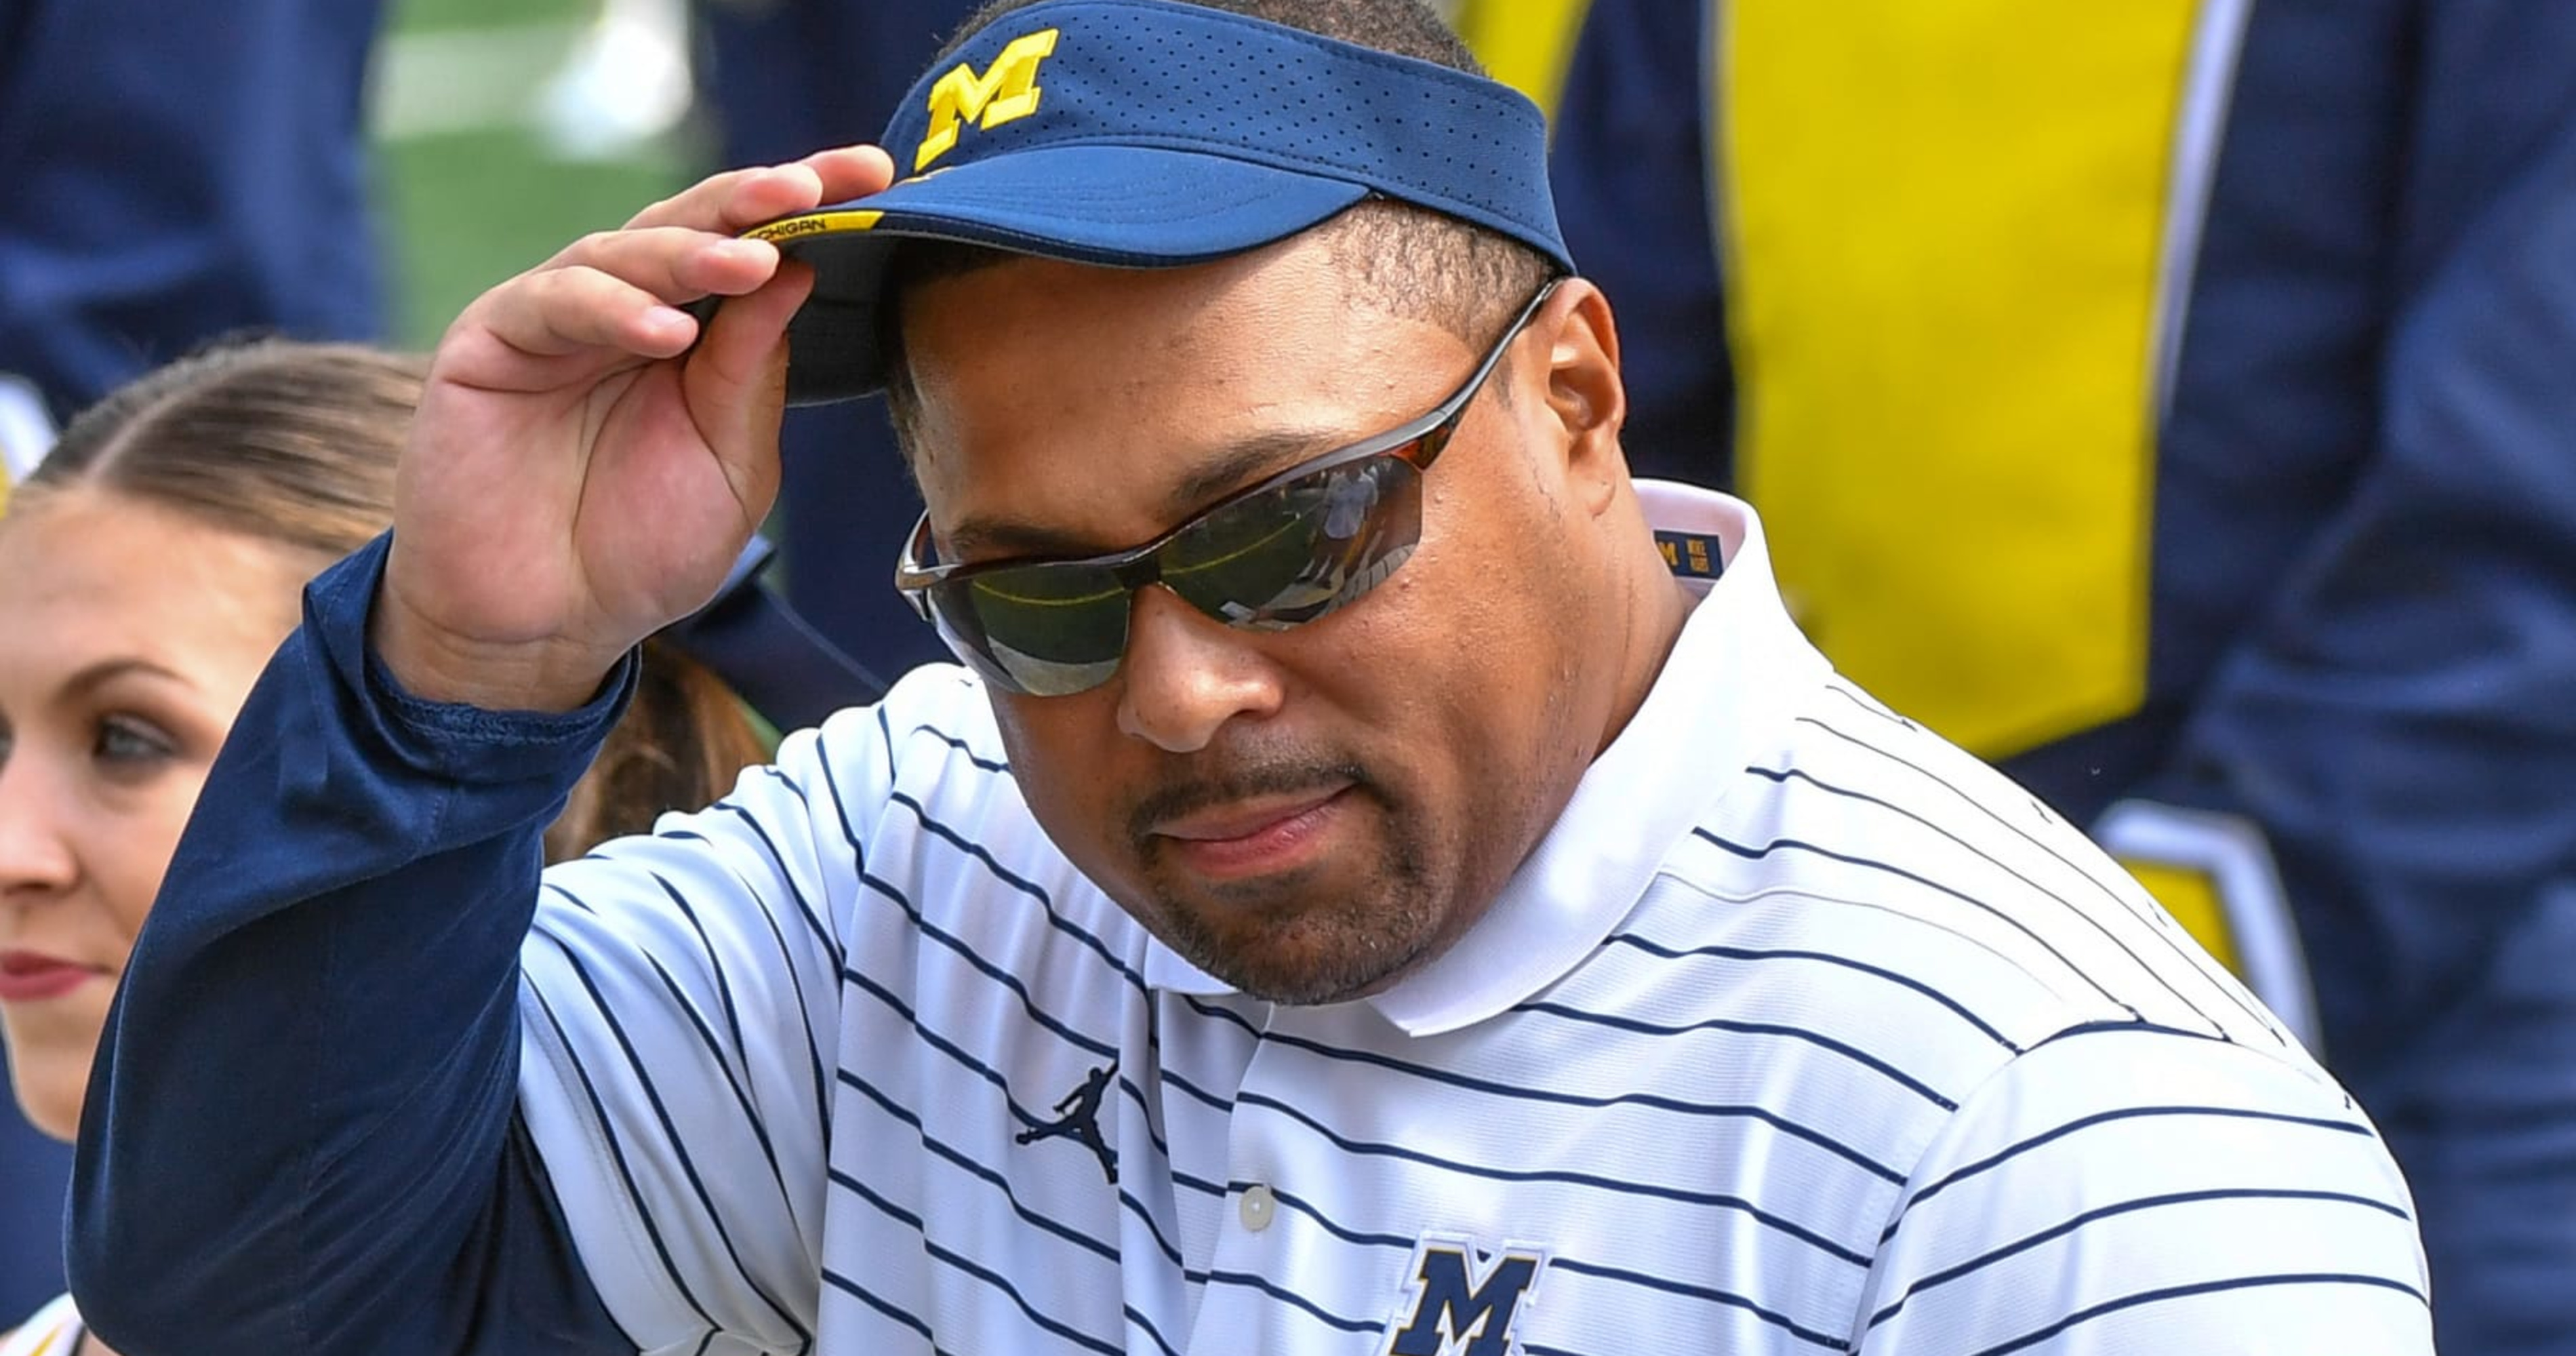 Michigan Coach Mike Hart Carted Off After Collapsing on Sideline